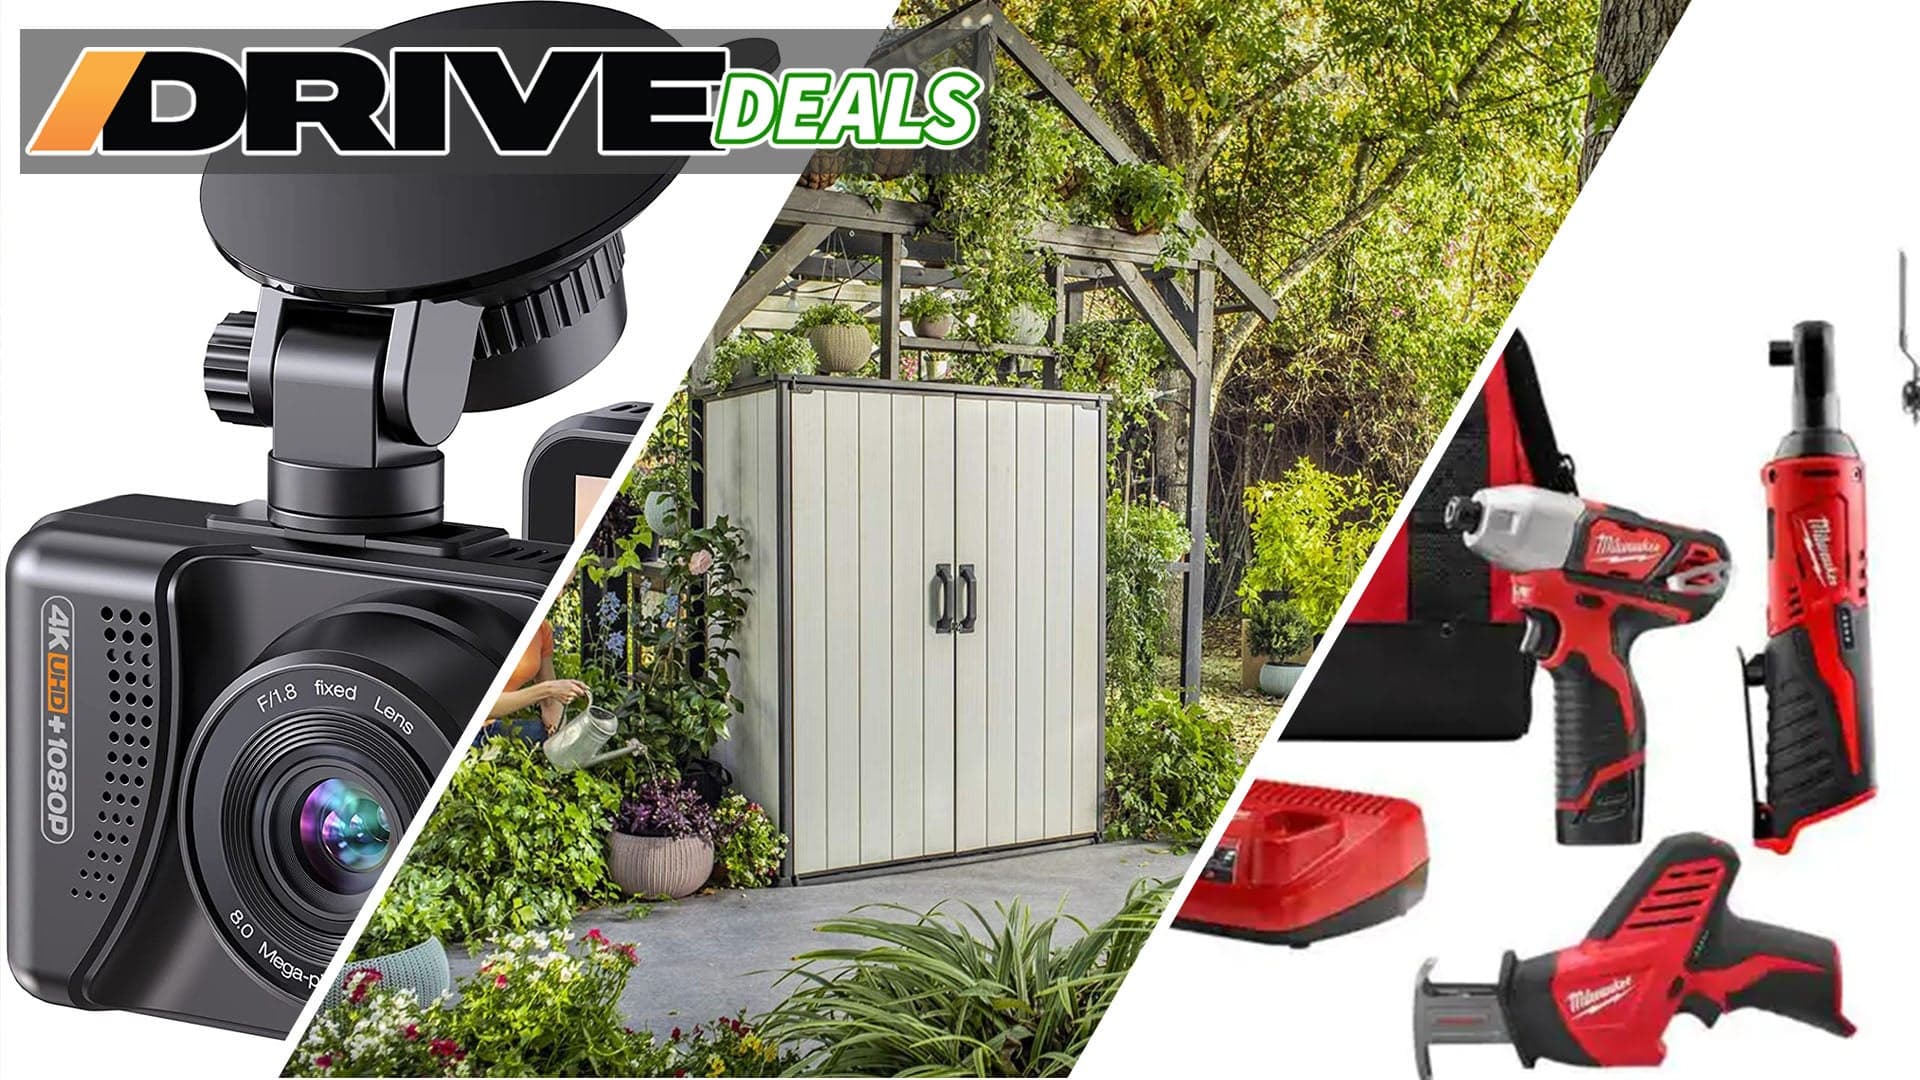 Save 47% On Milwaukee M12 Tools From Home Depot and Fuel That Motivation With More Deals